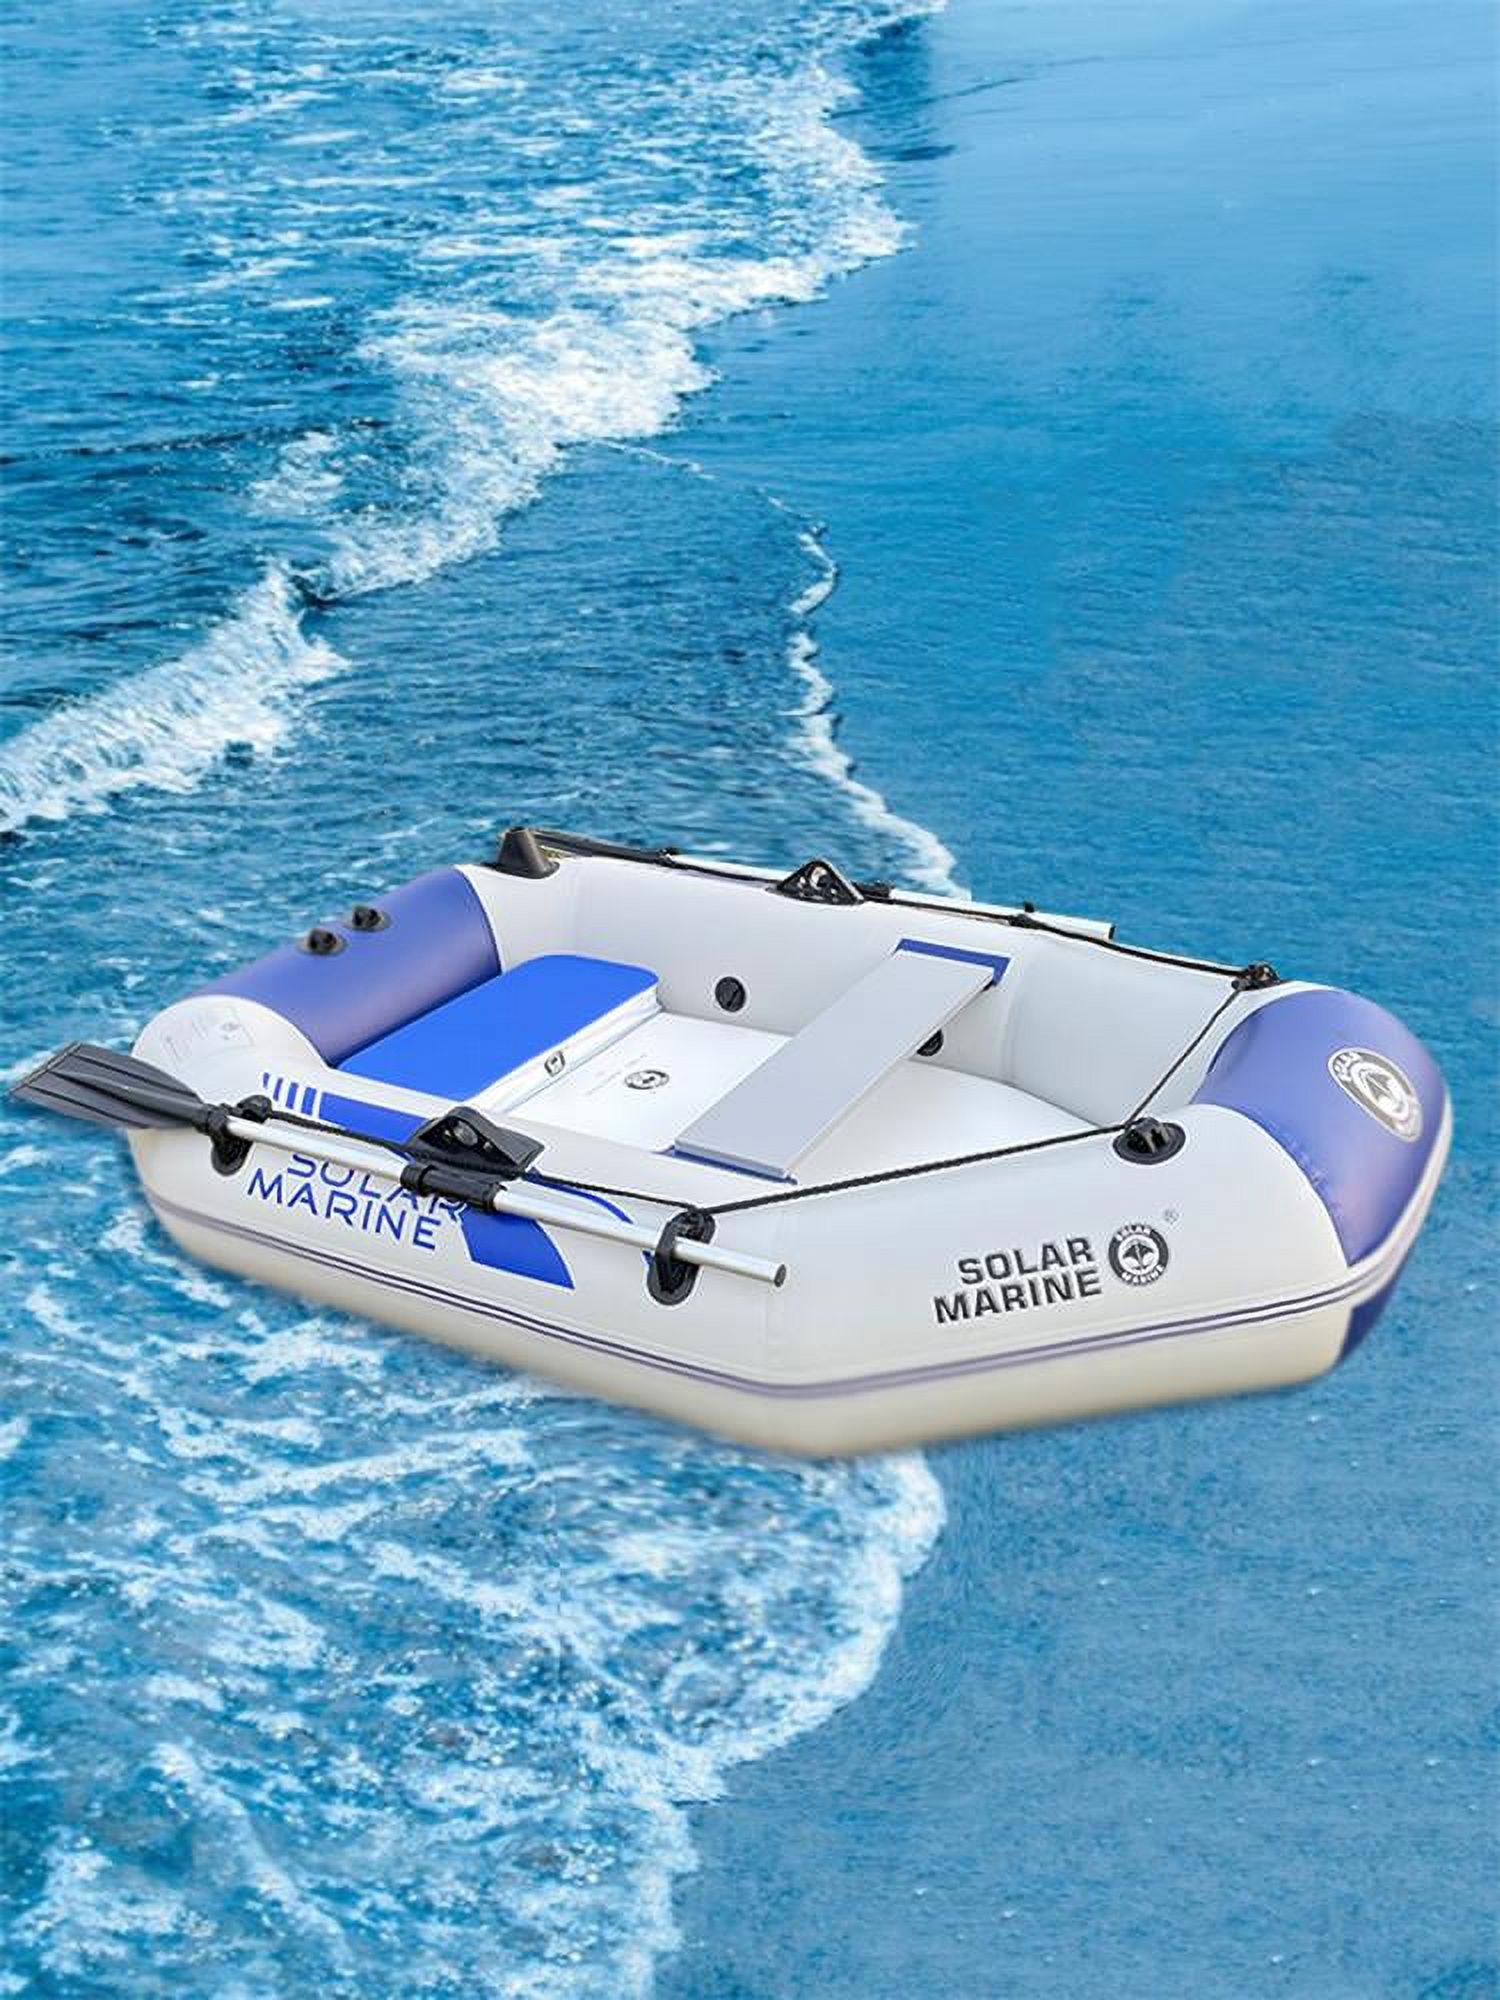 1 Person 175cm Inflatable Rowing Boat Ship Kayak Canoe Drifting Raft Dinghy Hovercraft Outdoor Fishing Diving Surfing Sailing B - image 4 of 6